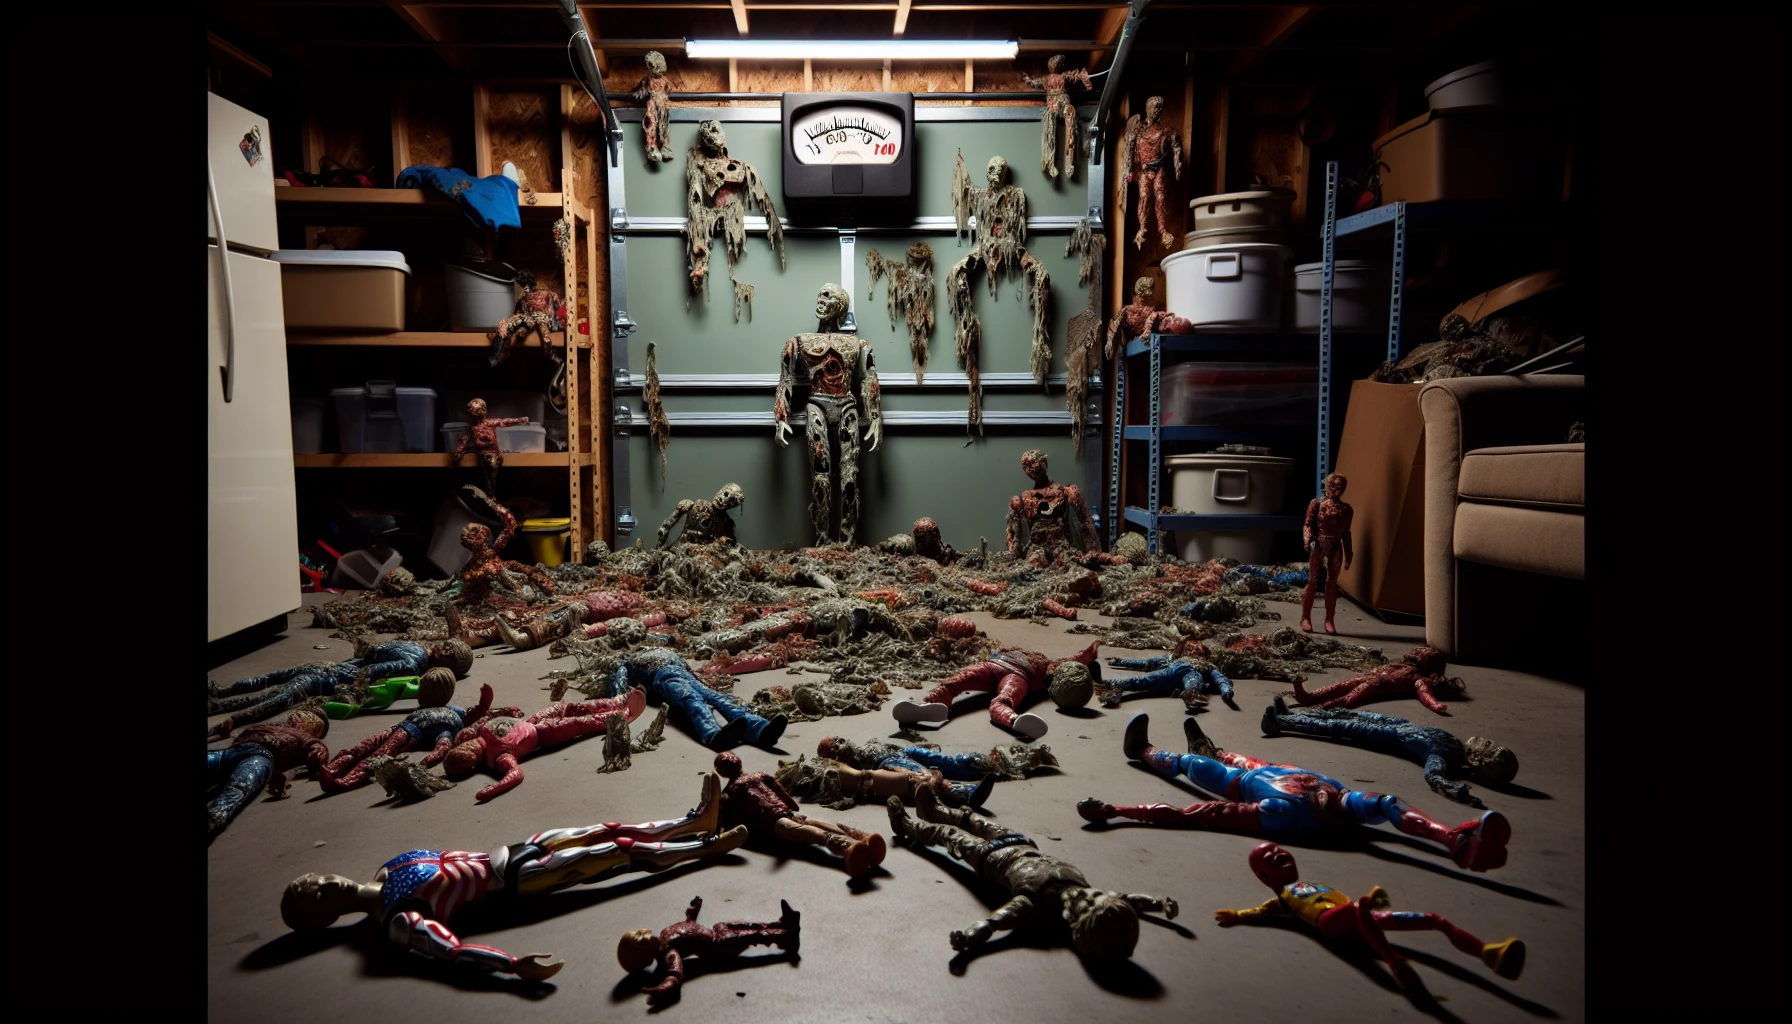 Warped action figures due to uncontrolled temperature in a garage